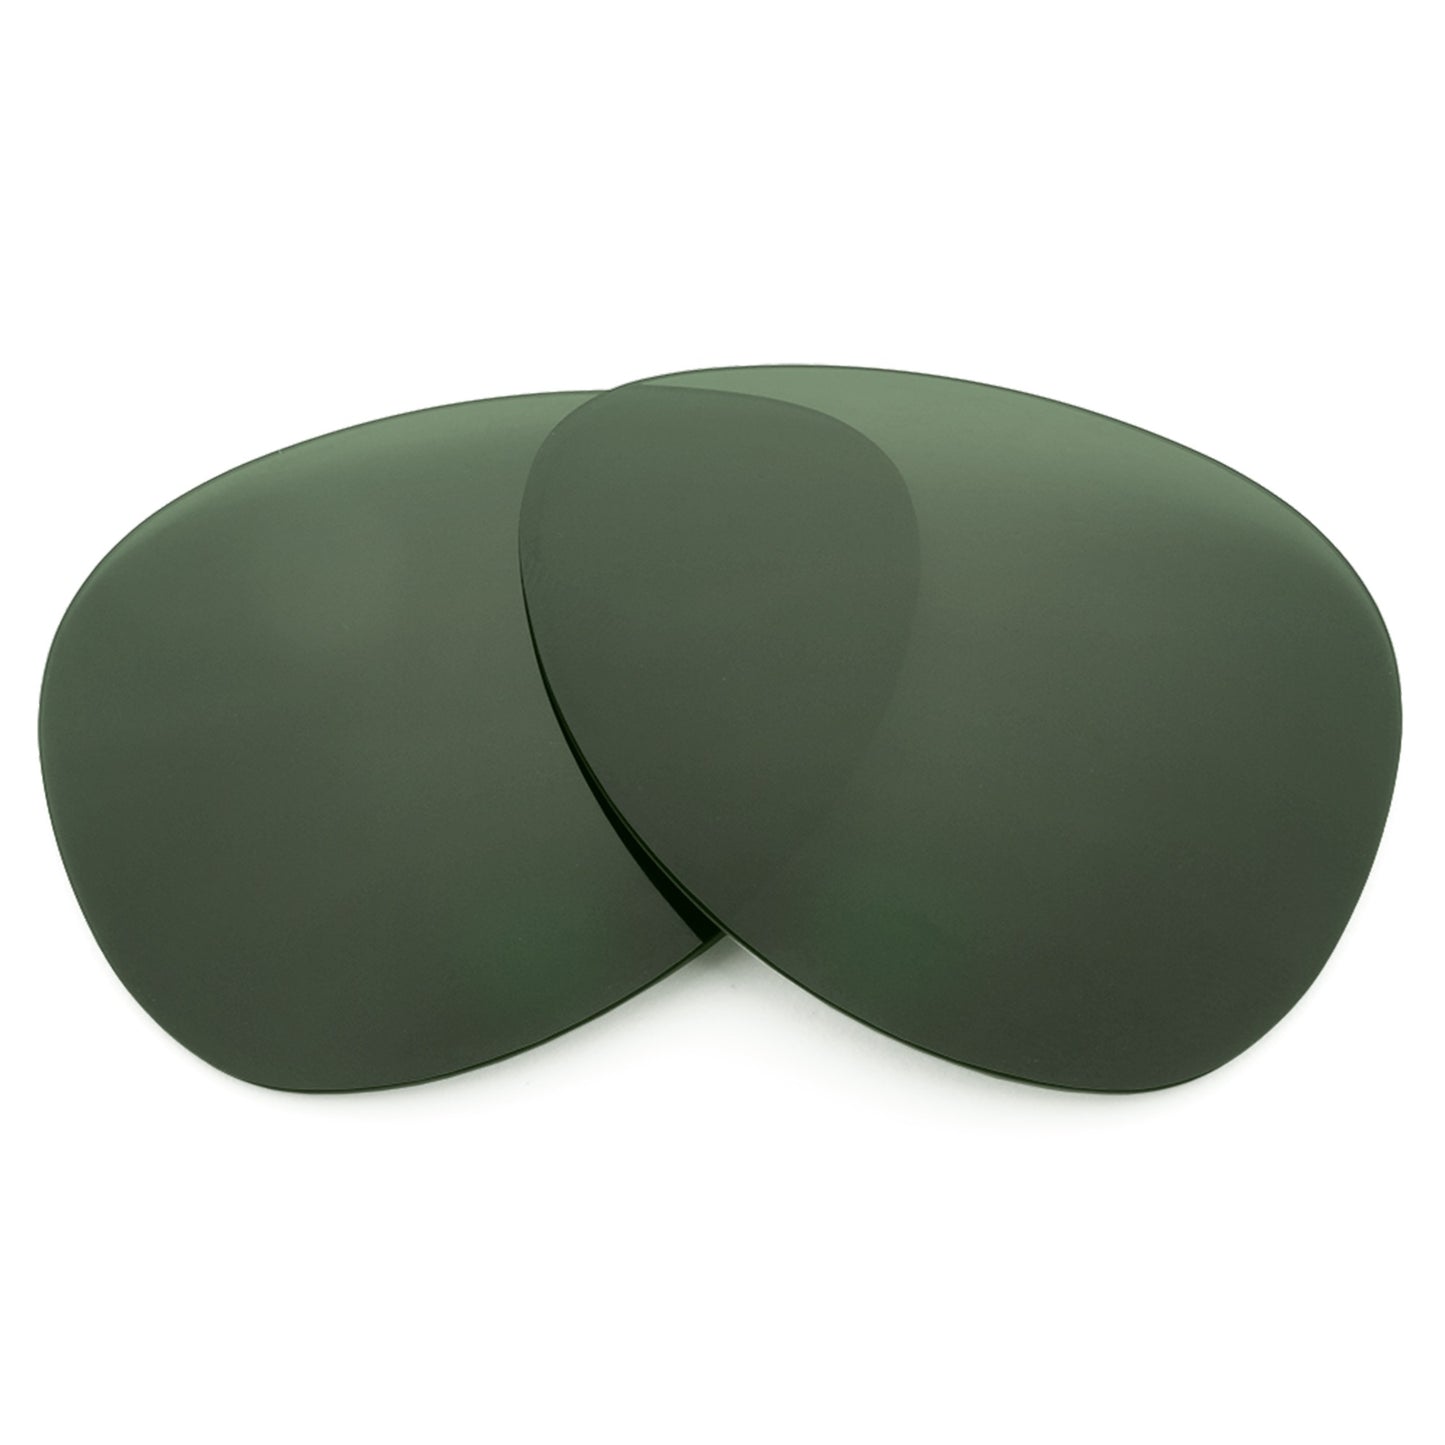 Revant replacement lenses for Ray-Ban Jackie Ohh RB4101 58mm Non-Polarized Gray Green